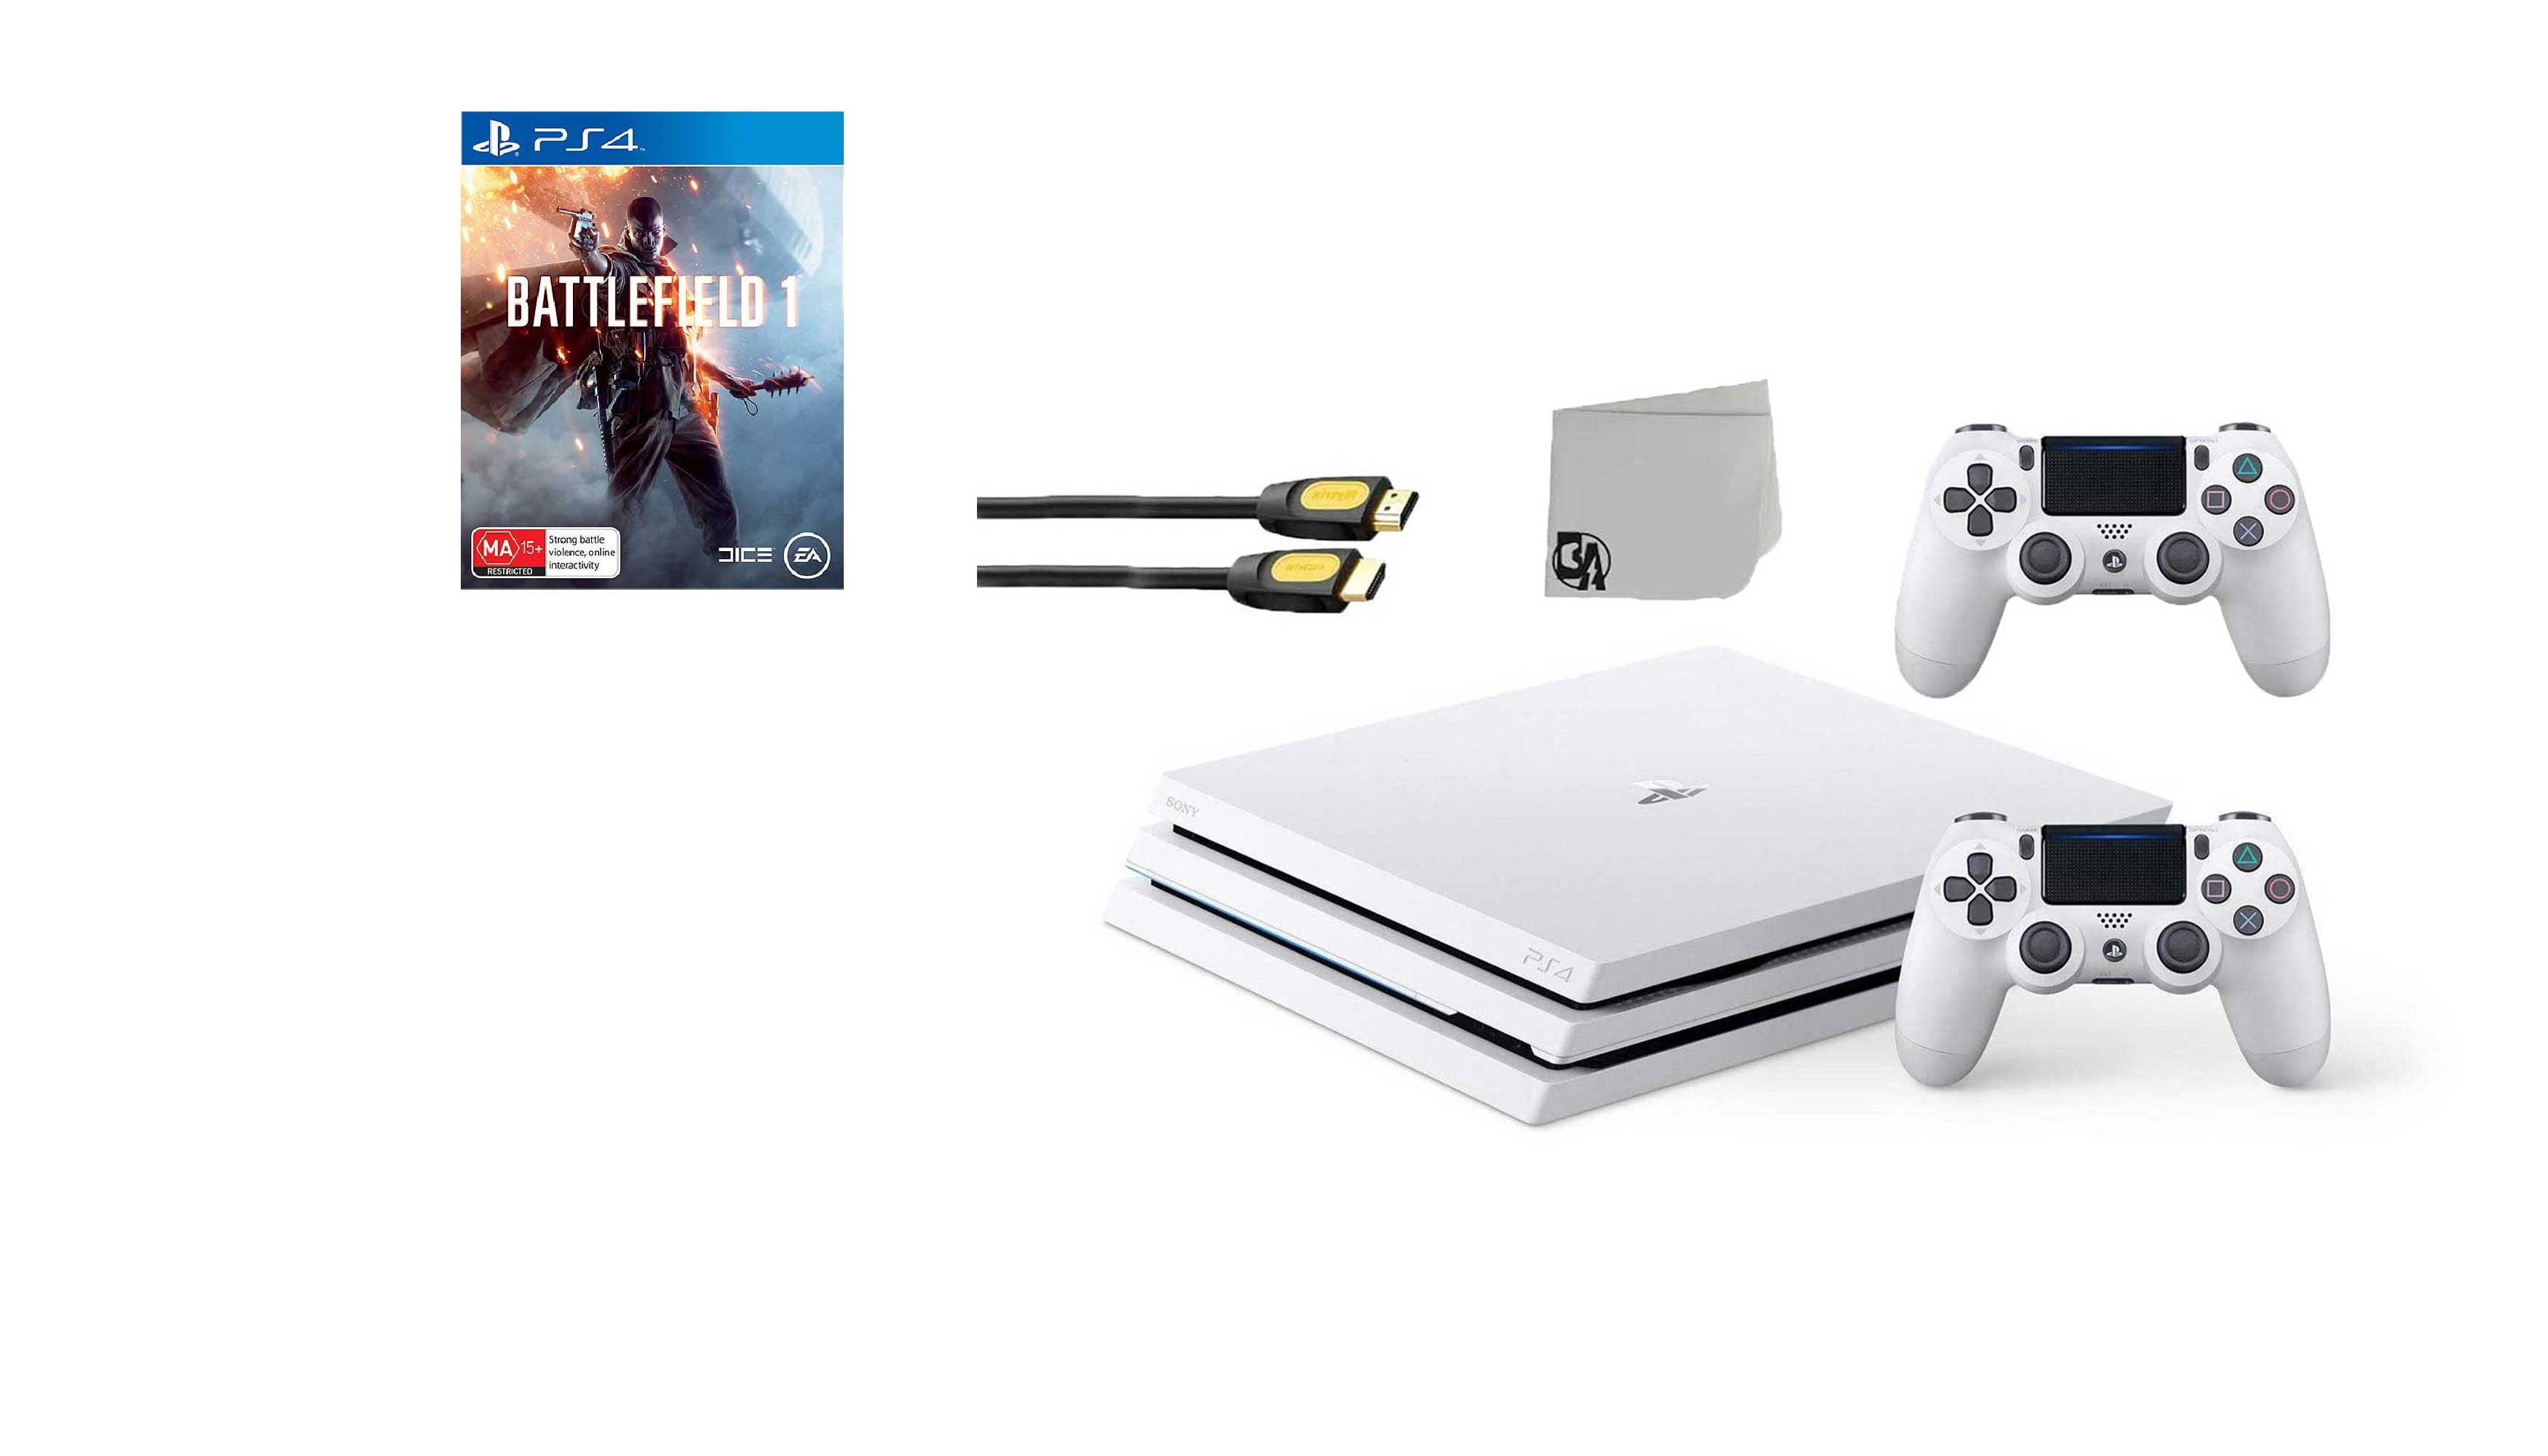 trompet Frastøde side Sony PlayStation 4 Pro Glacier 1TB Gaming Consol White 2 Controller  Included with Battlefield 1 BOLT AXTION Bundle Used - Walmart.com